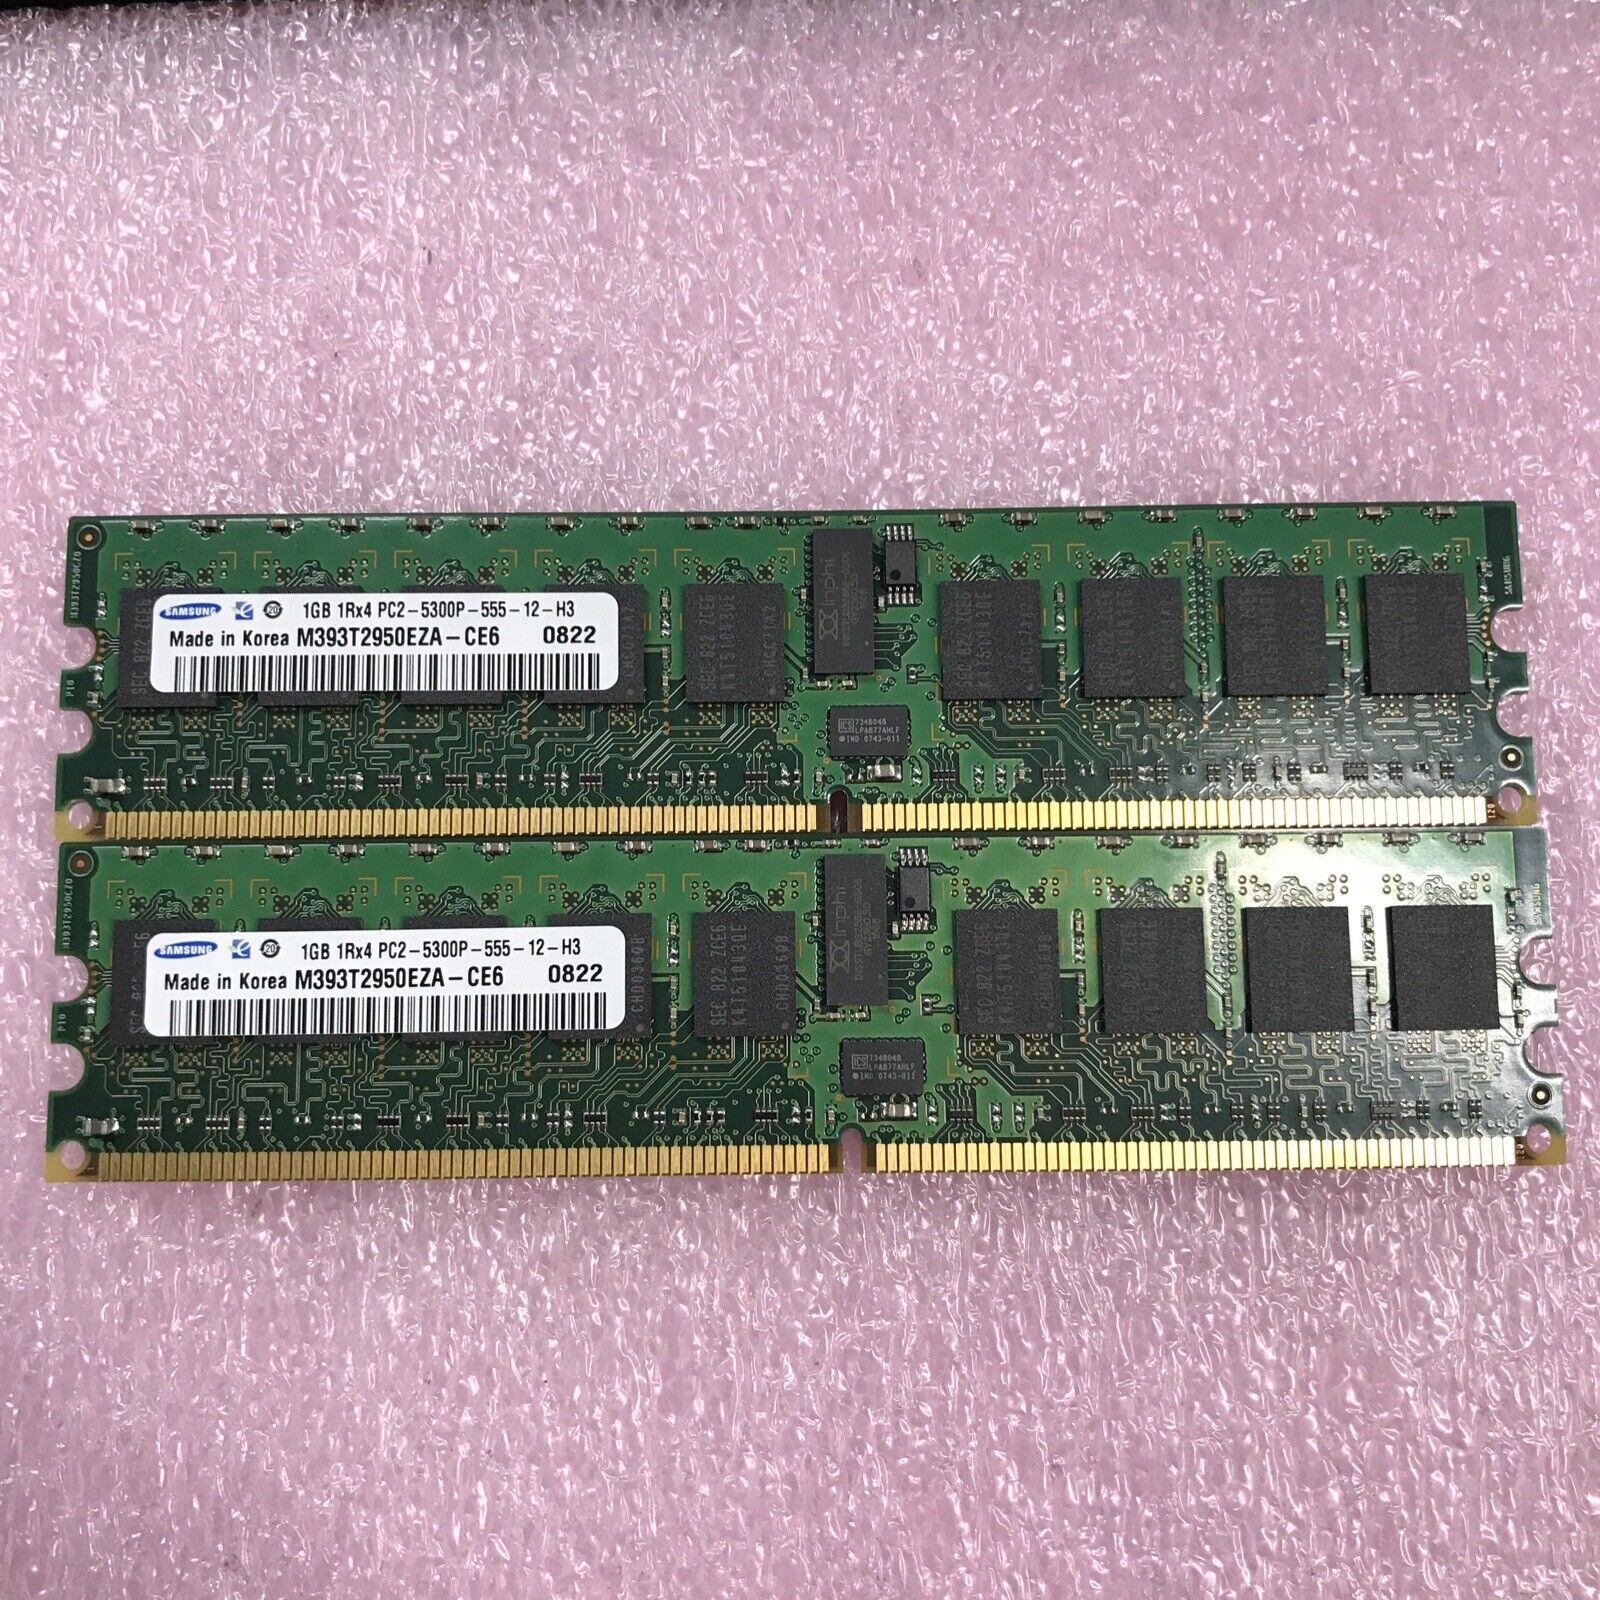 Samsung 2GB Kit 2x1GB 1Rx4 PC2-5300P-555-12-H3 0822 (Tested and Working)